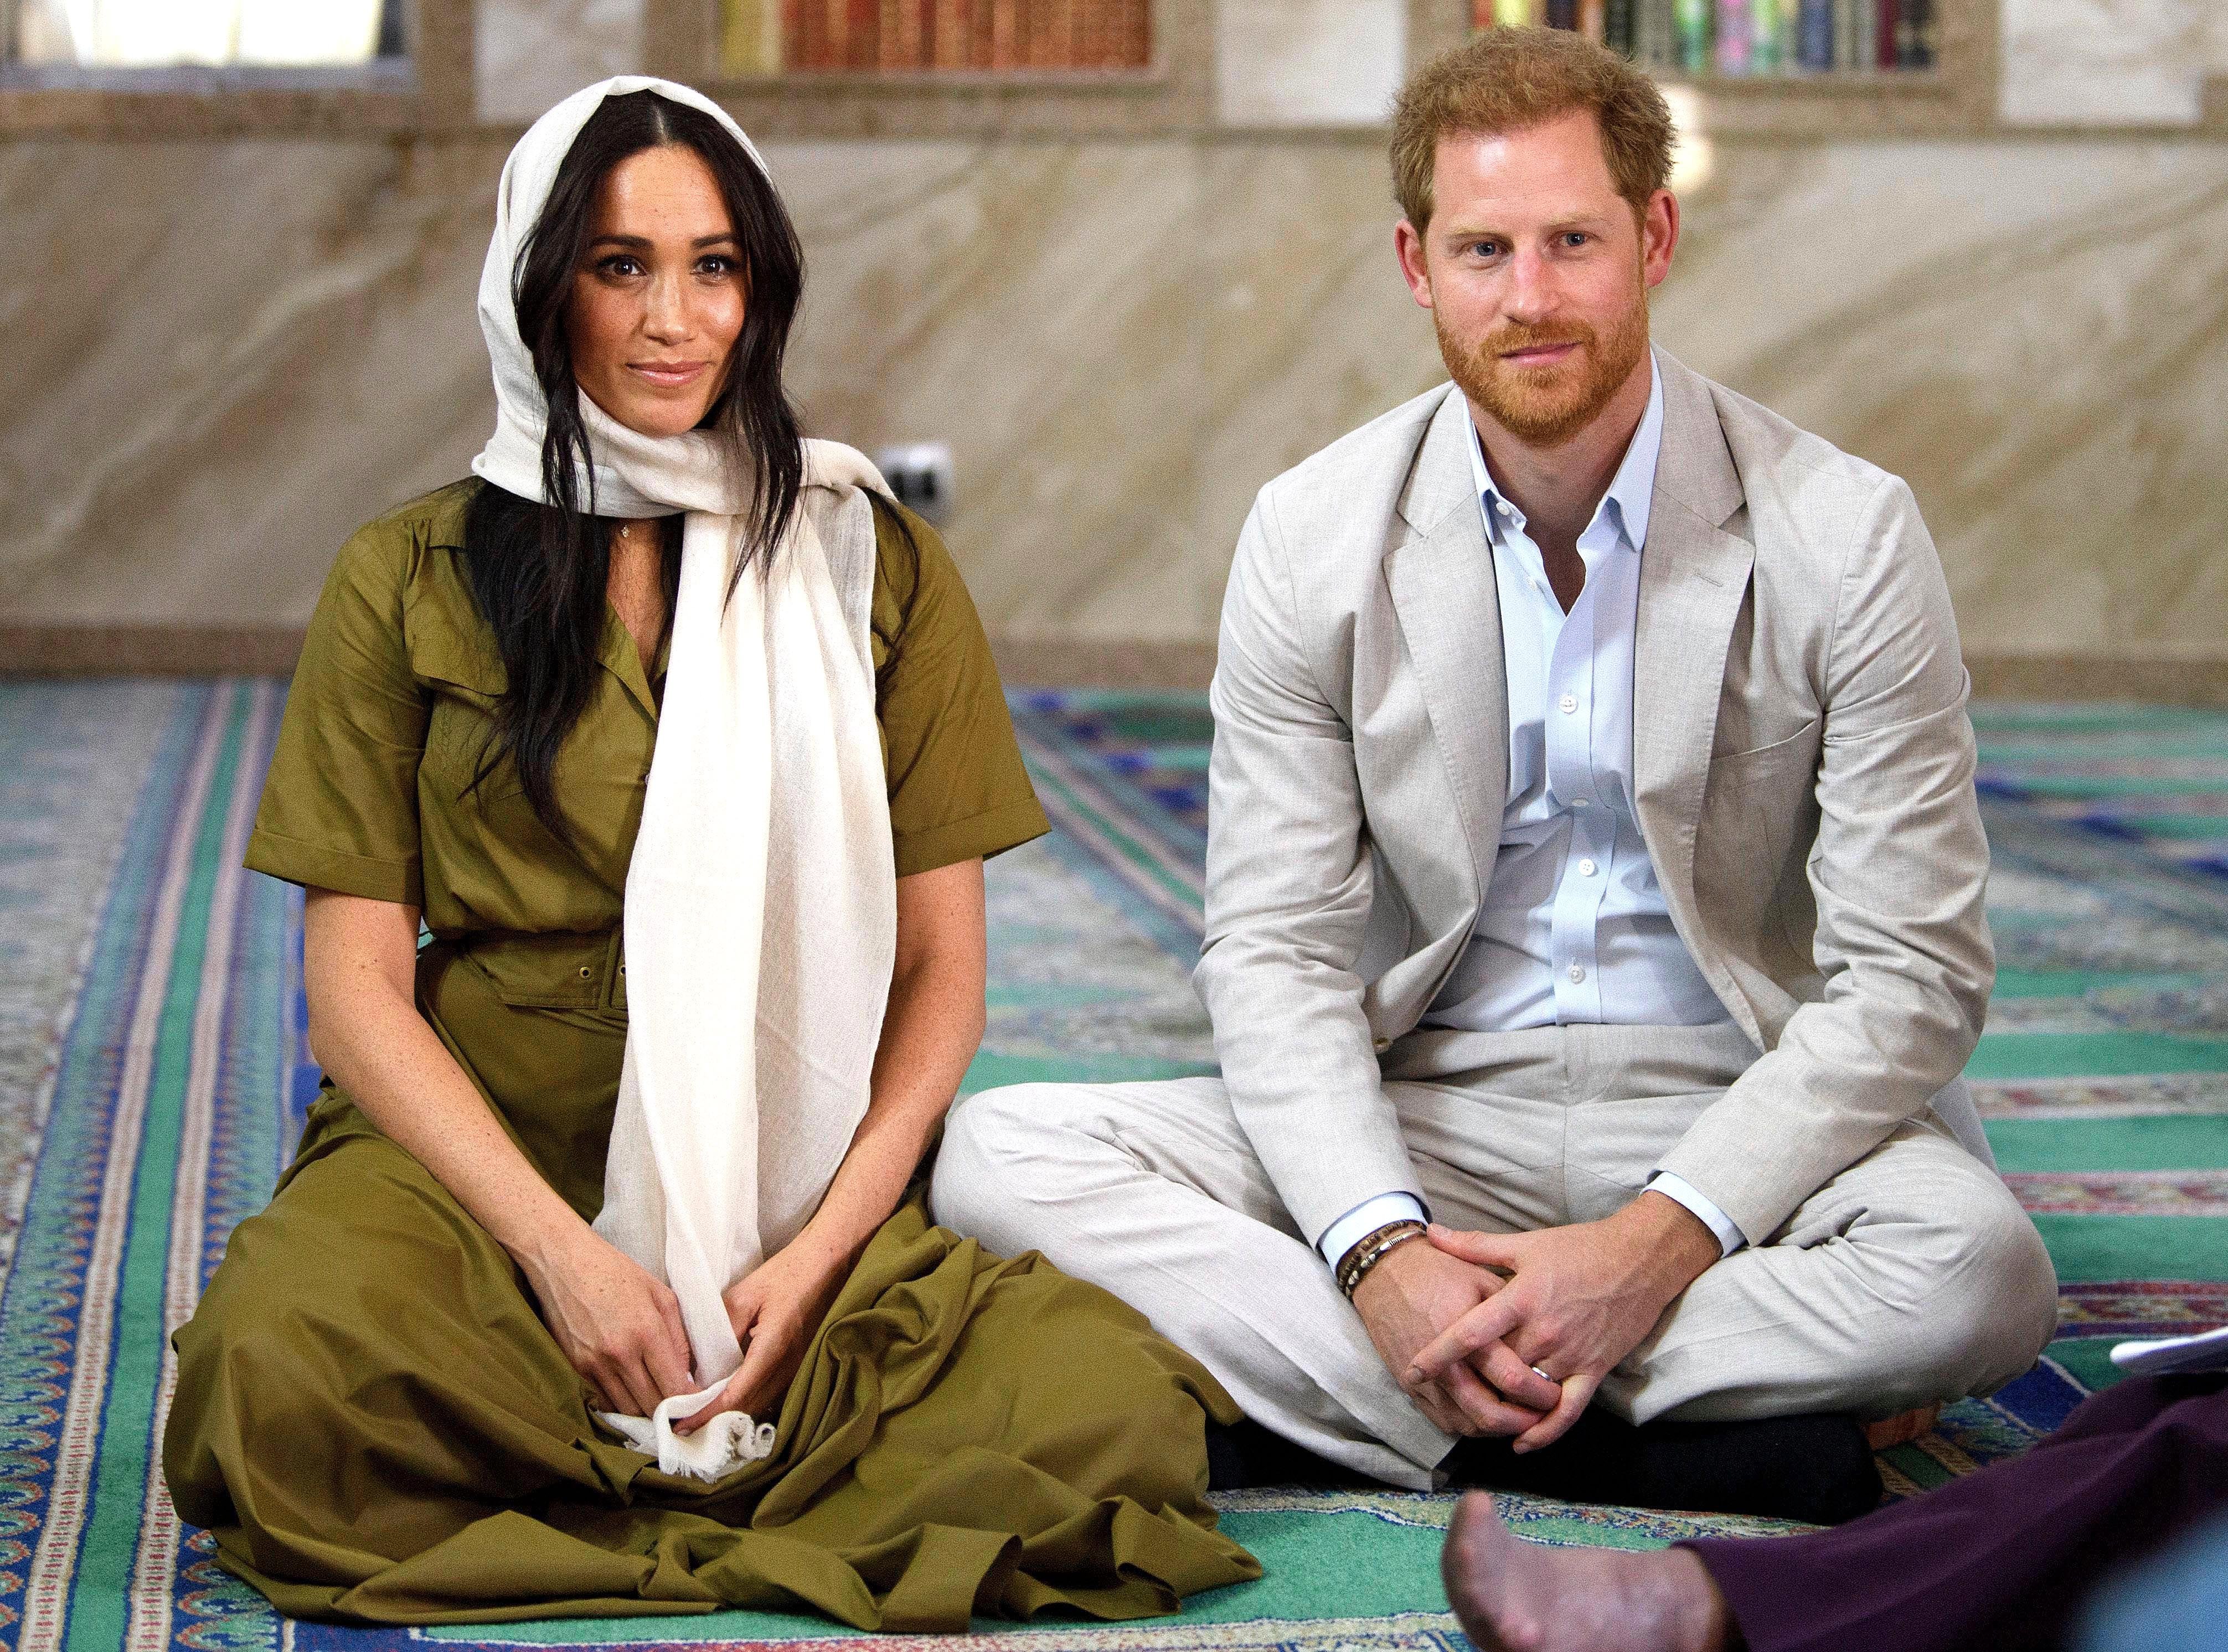 Meghan Markle visits Auwal Mosque with Prince Harry, on September 24, 2019 | Photo: GettyImages